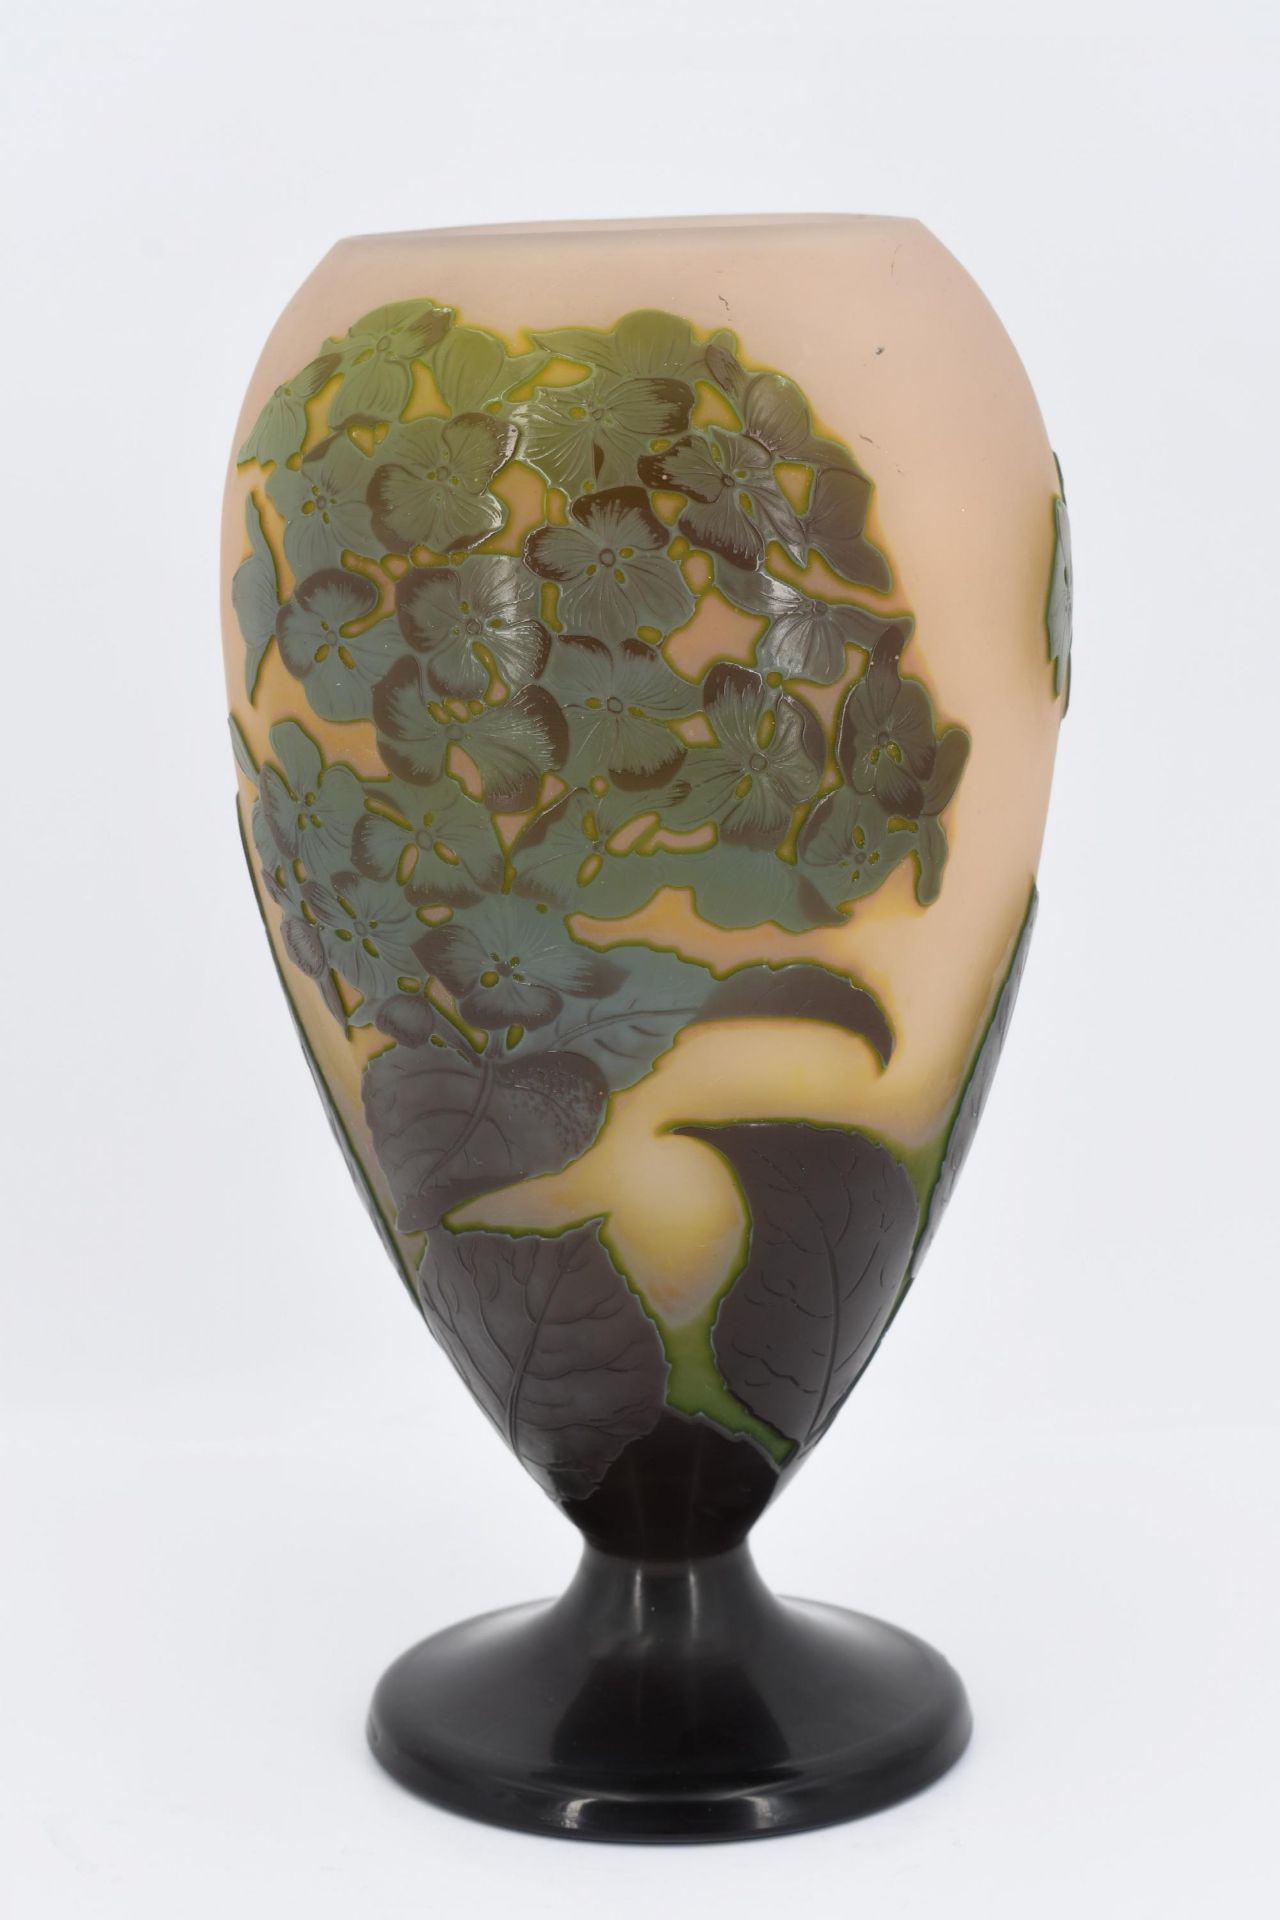 Small glass vase with floral décor - Image 2 of 13